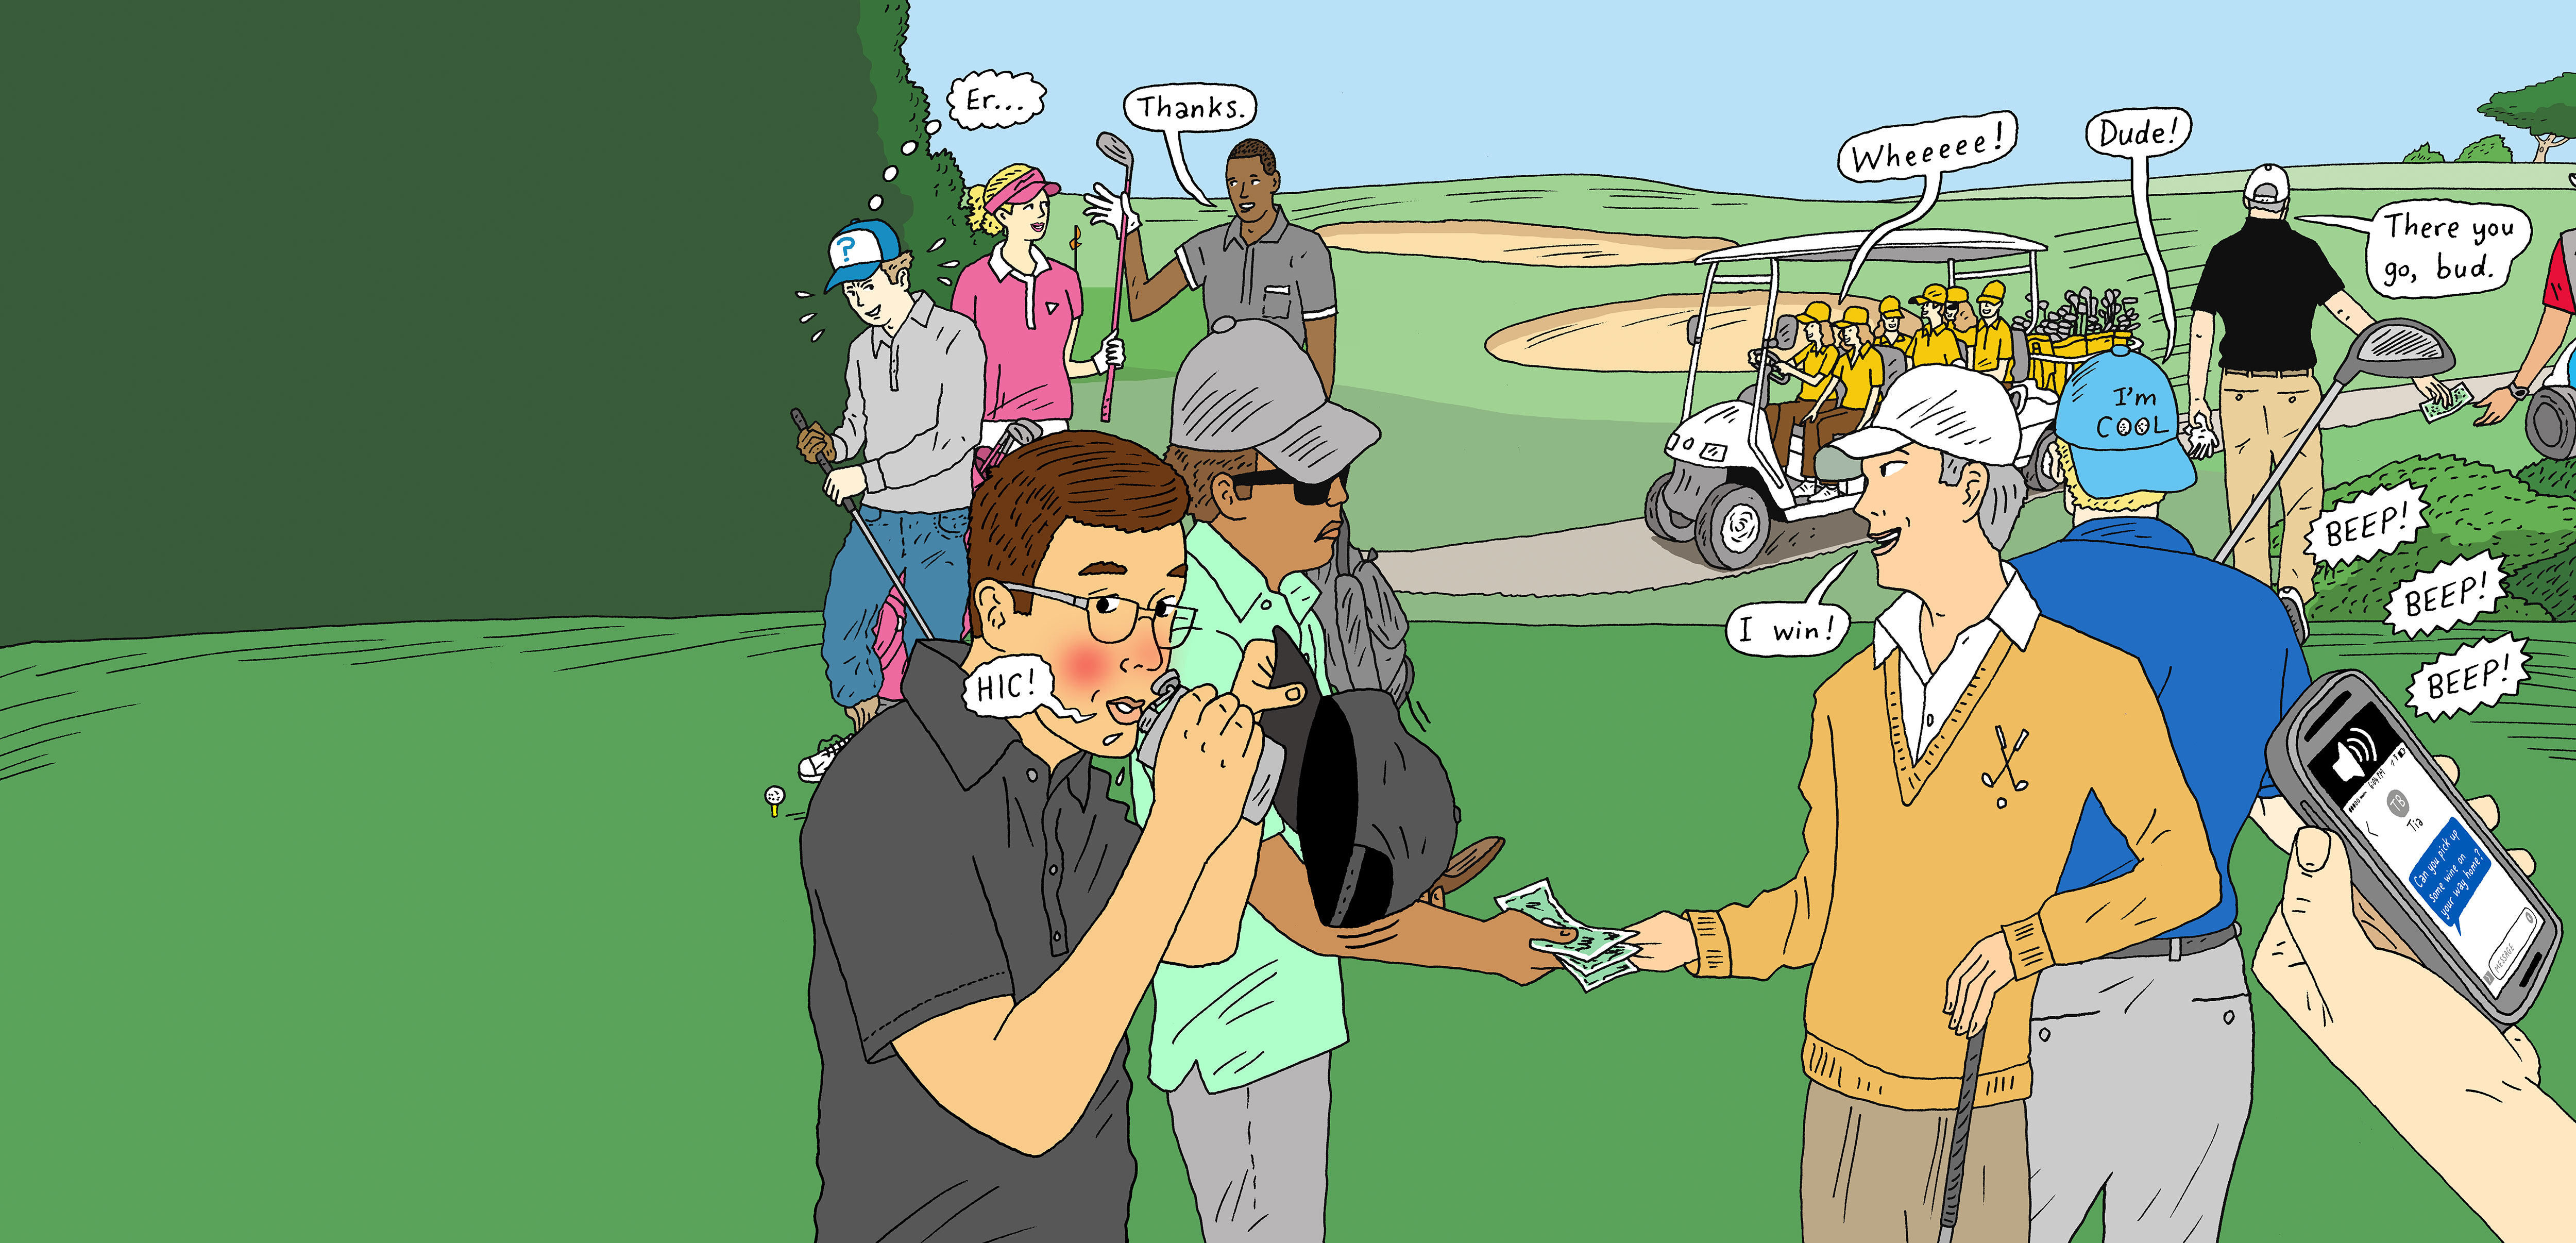 III. Dress Code Etiquette on the Golf Course